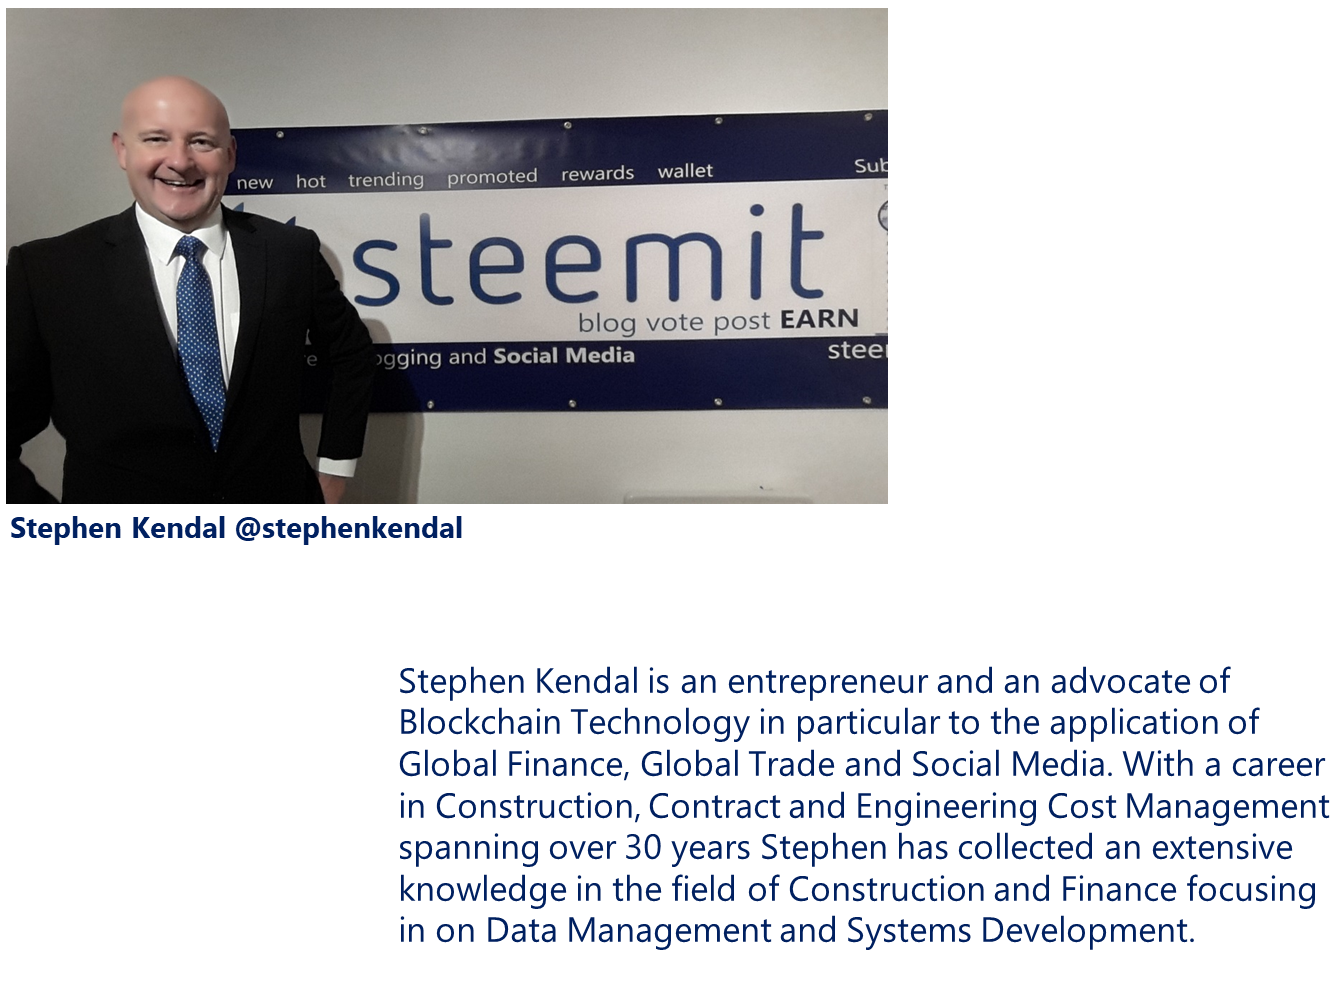 Steemit to Present at London Investor Show - Speaker Stephen Kendal.png